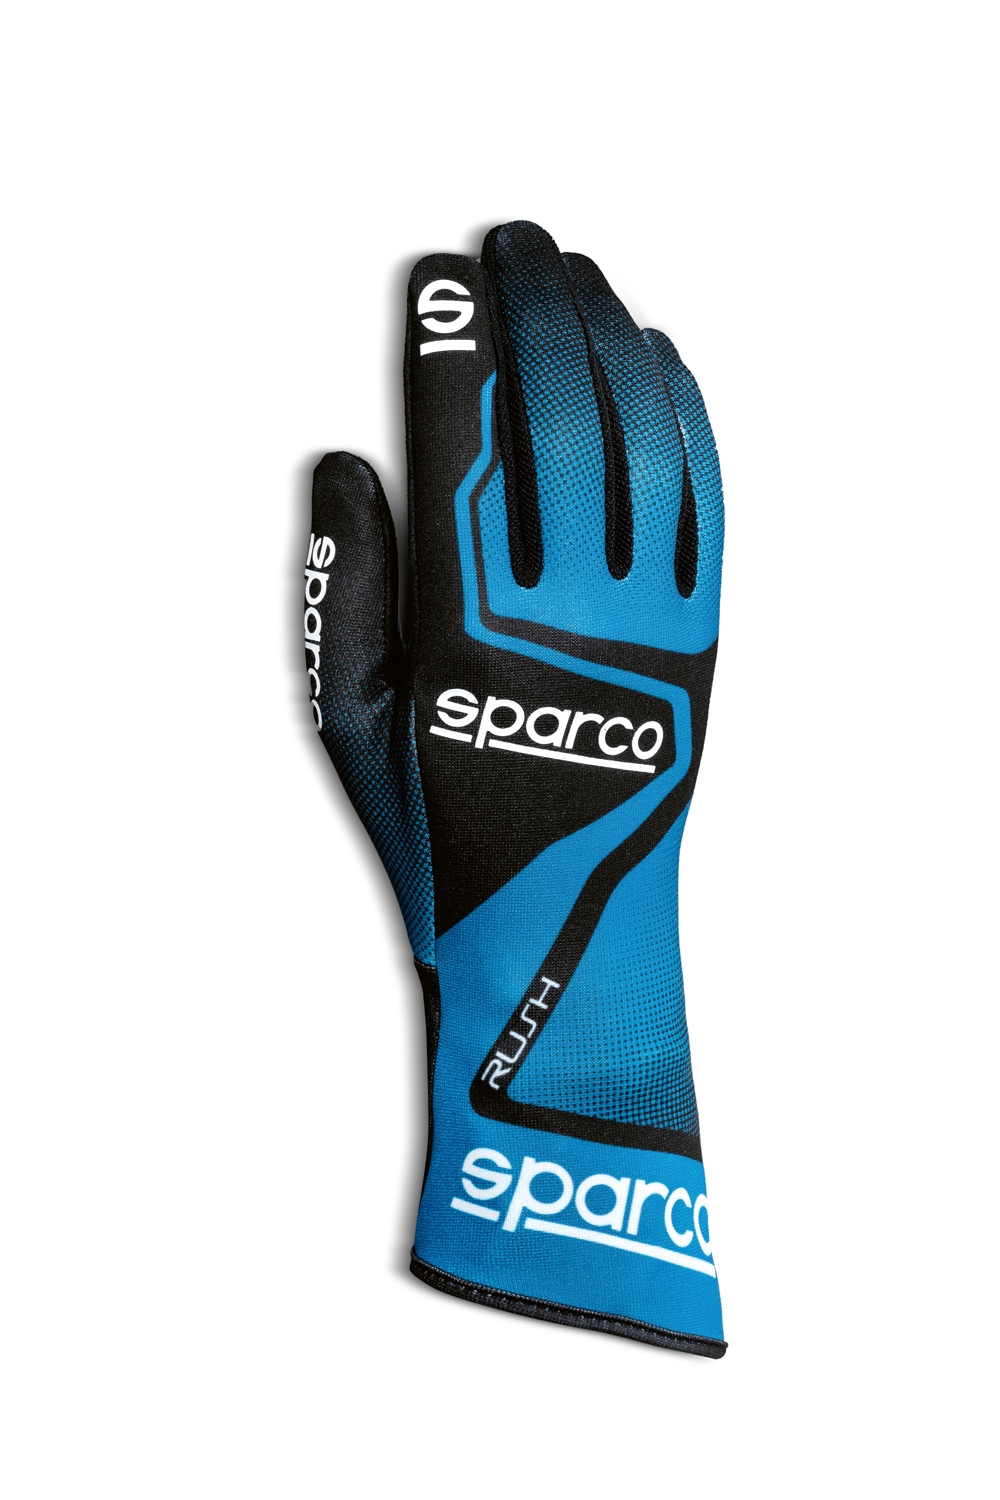 Sparco Karthandschuhe Rush | Point Racing